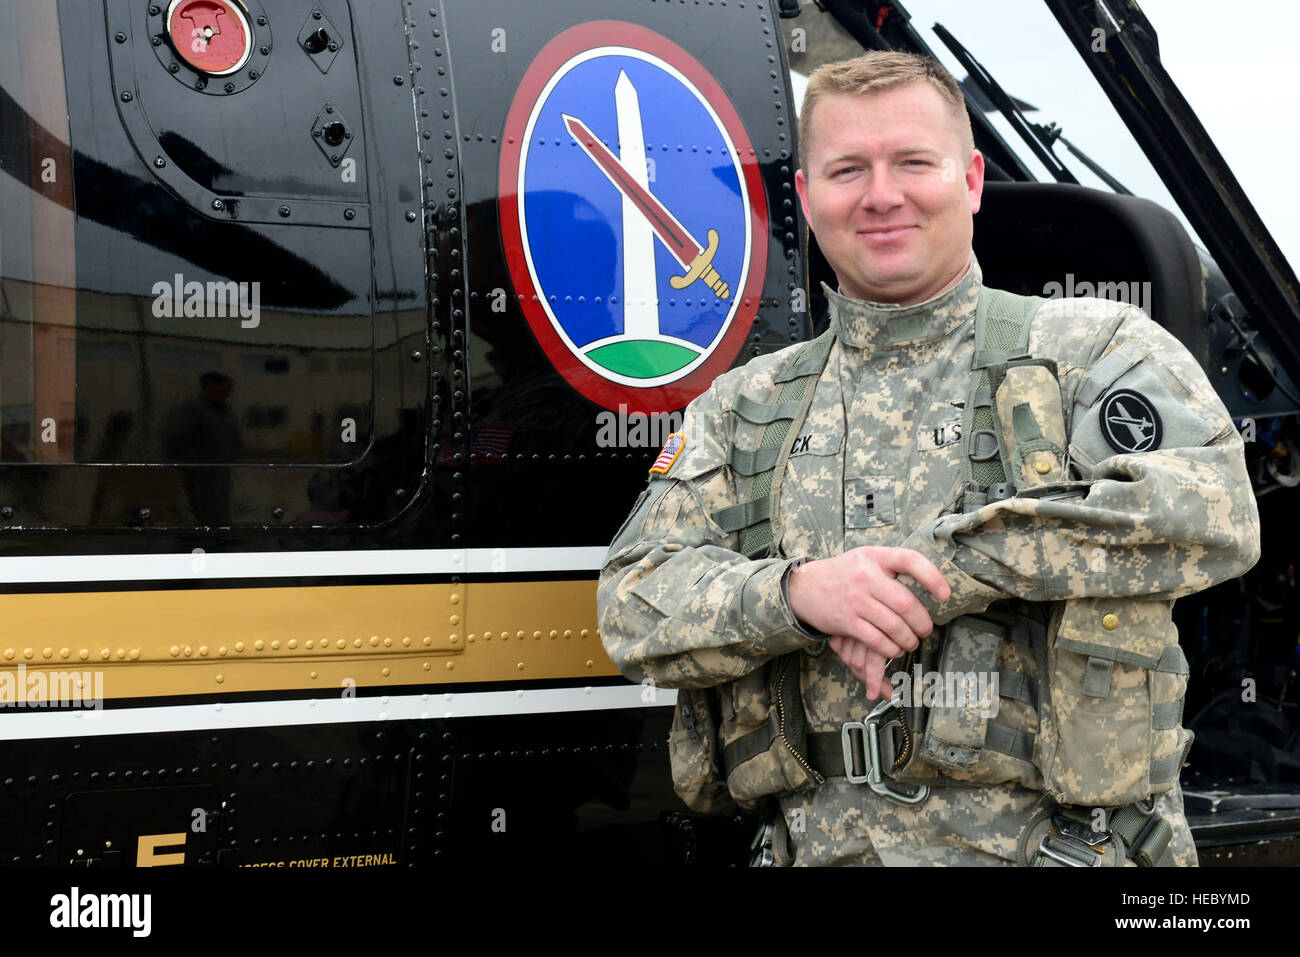 U.S. Army Chief Warrant Officer 2 Michael Beck, Charlie Company, 12th Aviation Battalion pilot, stands in front of a VH-60 Black Hawk helicopter after its final flight to Fort Eustis, Va., March 10, 2015. The retired helicopter was used as a form of transportation for VIPs, including the chairman of the Joint Chiefs of Staff, and is set to become a display at the U.S. Army Transportation Museum. (U.S. Air Force photo by Senior Airman Kimberly Nagle/Released) Stock Photo